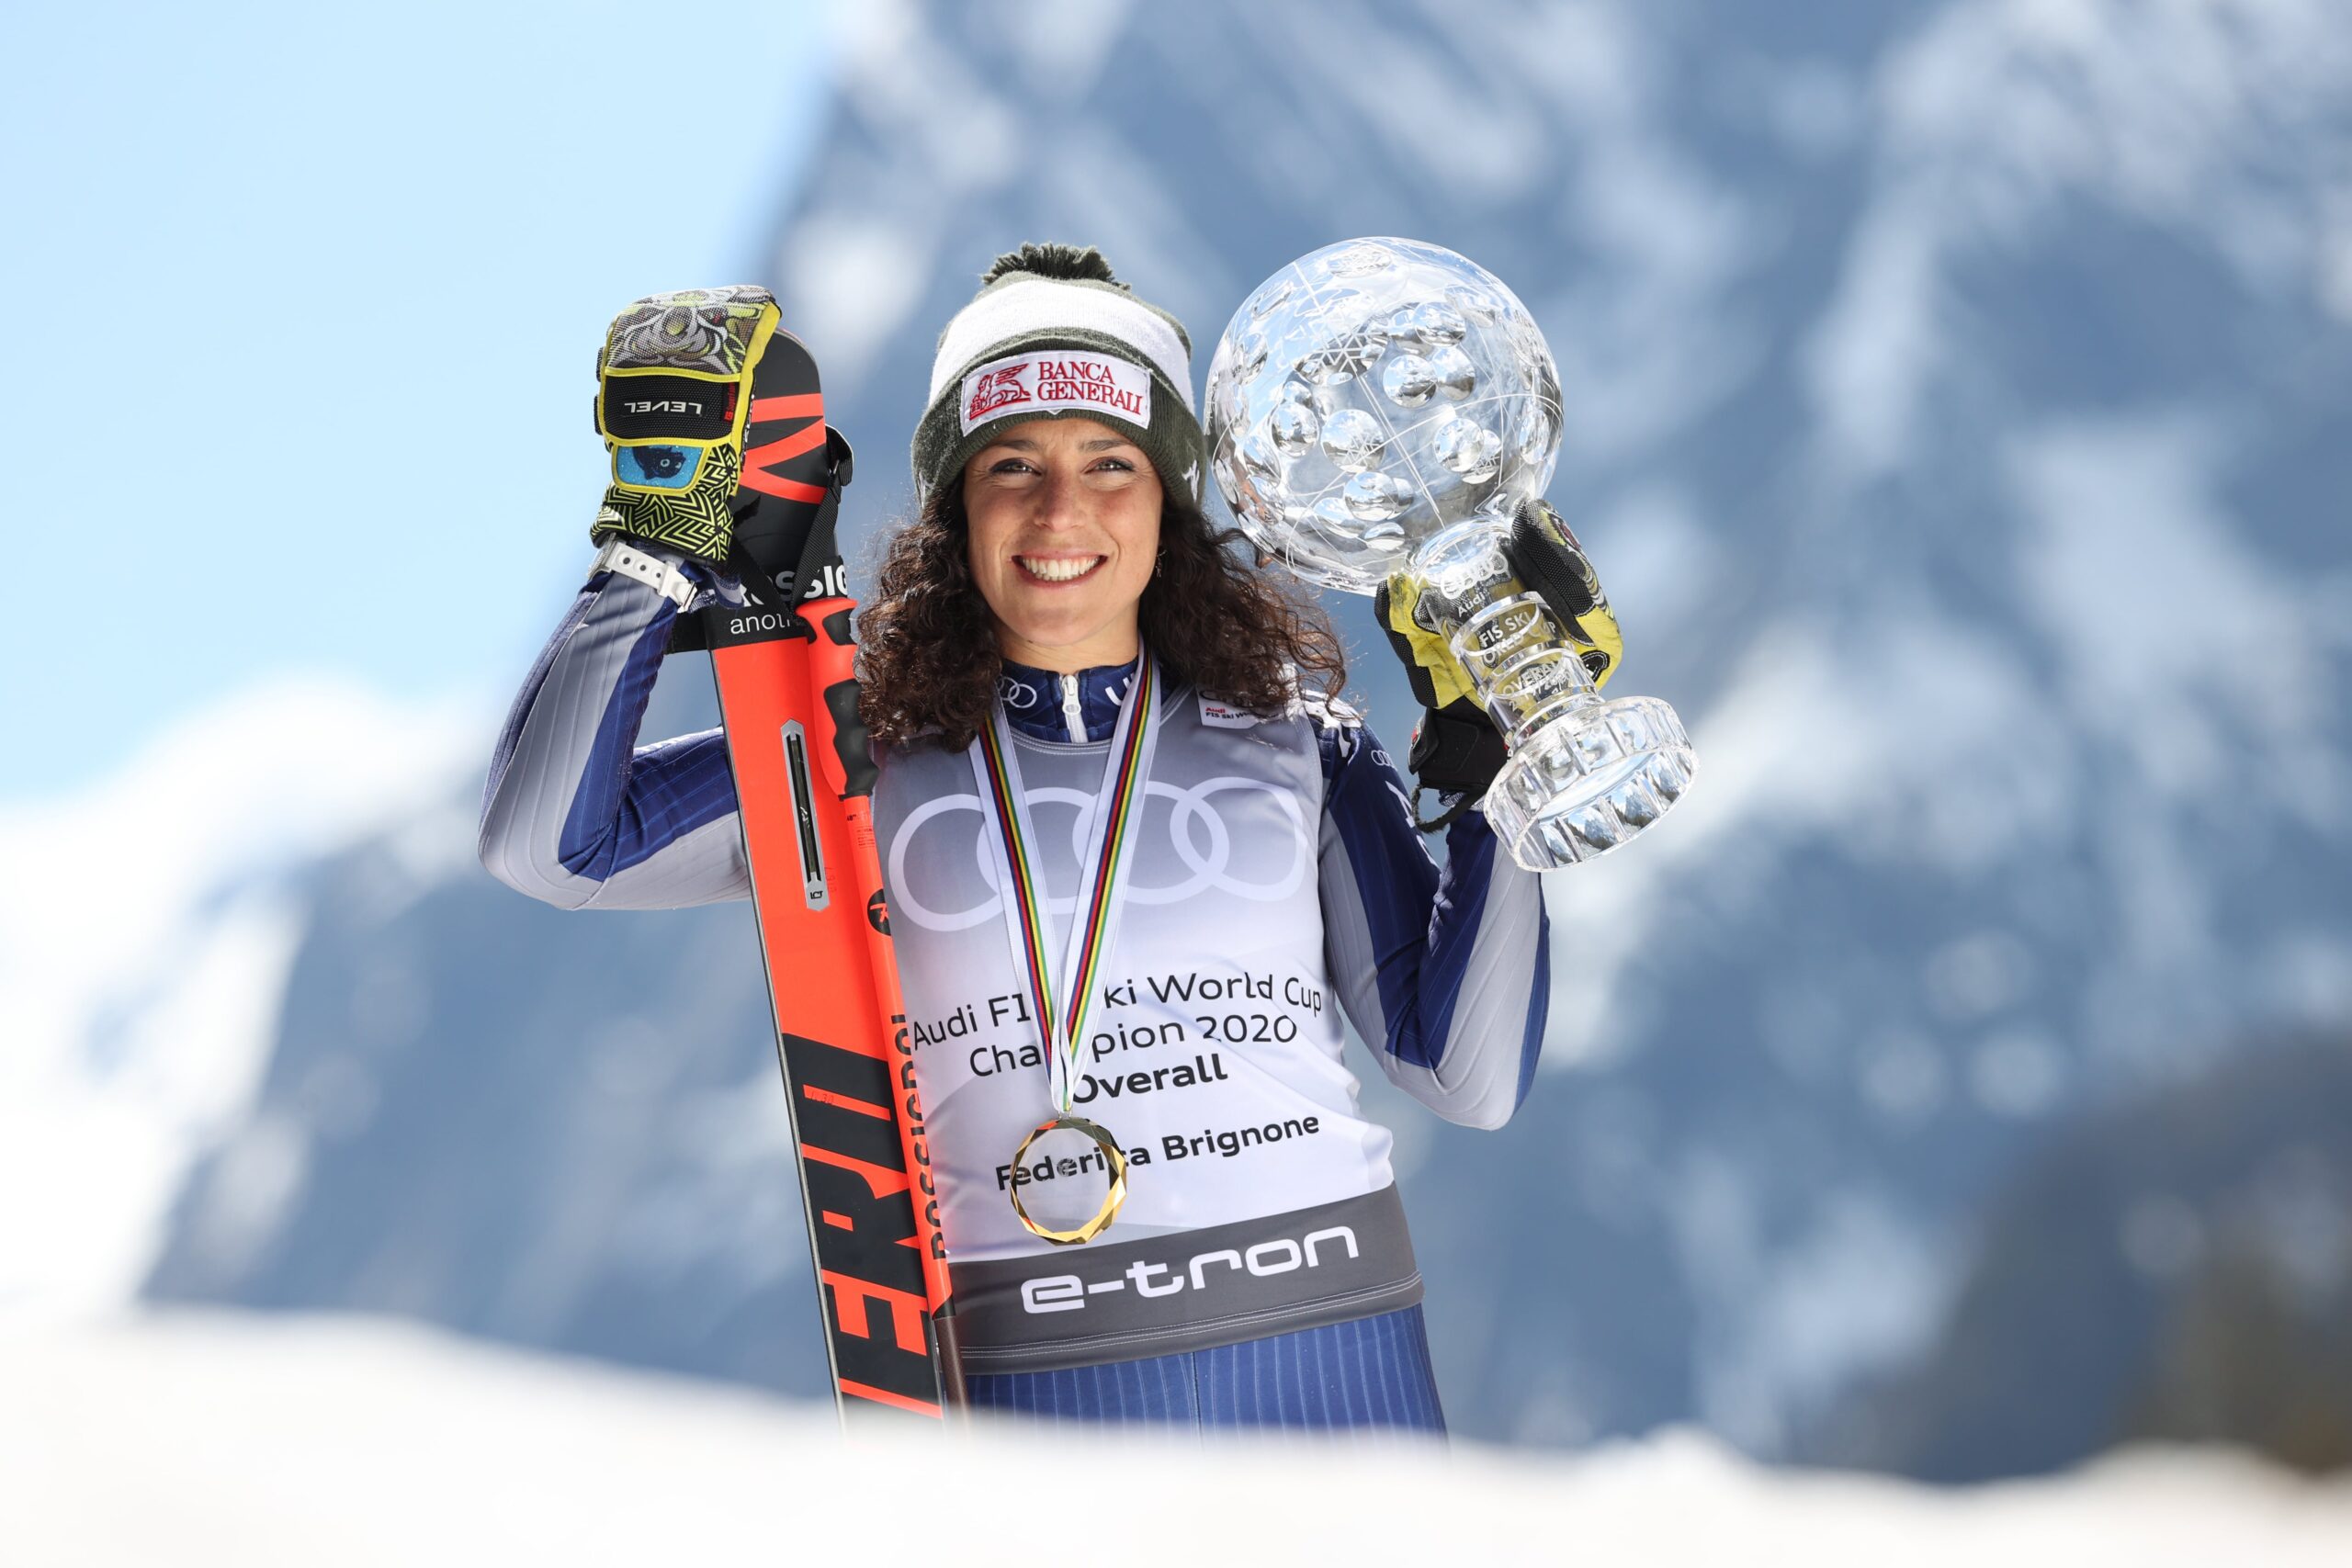 Peak of Taste is giving away a morning on skis with Federica Brignone ...